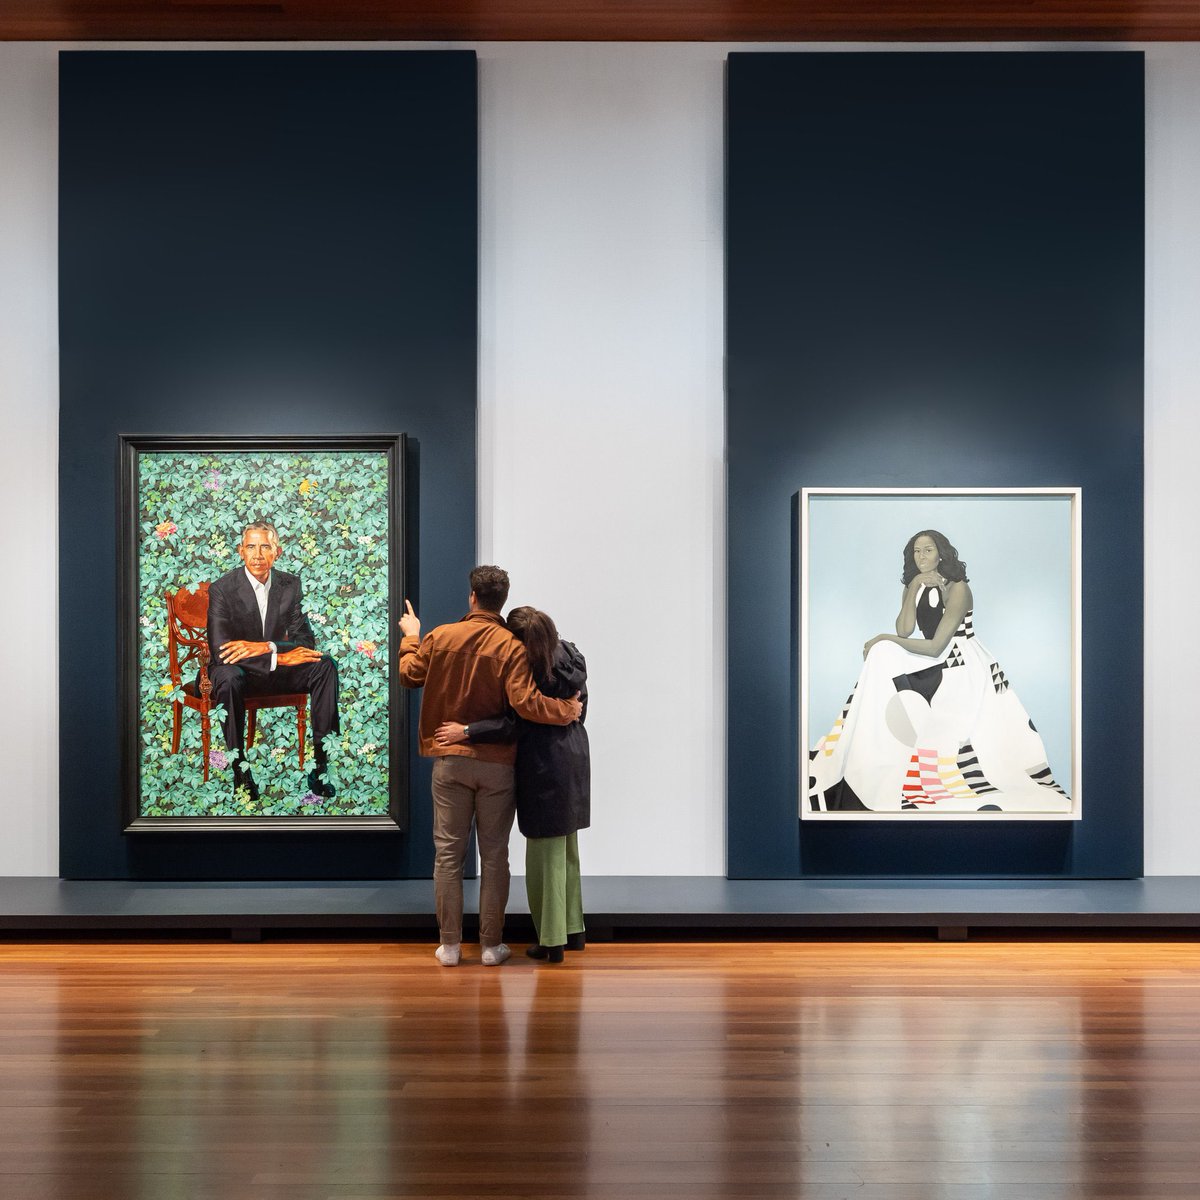 The eagle has landed 🦅 The Obama Portraits Tour has officially arrived at the de Young Museum.

Admission to The Obama Portraits Tour is free this weekend thanks to @Google.